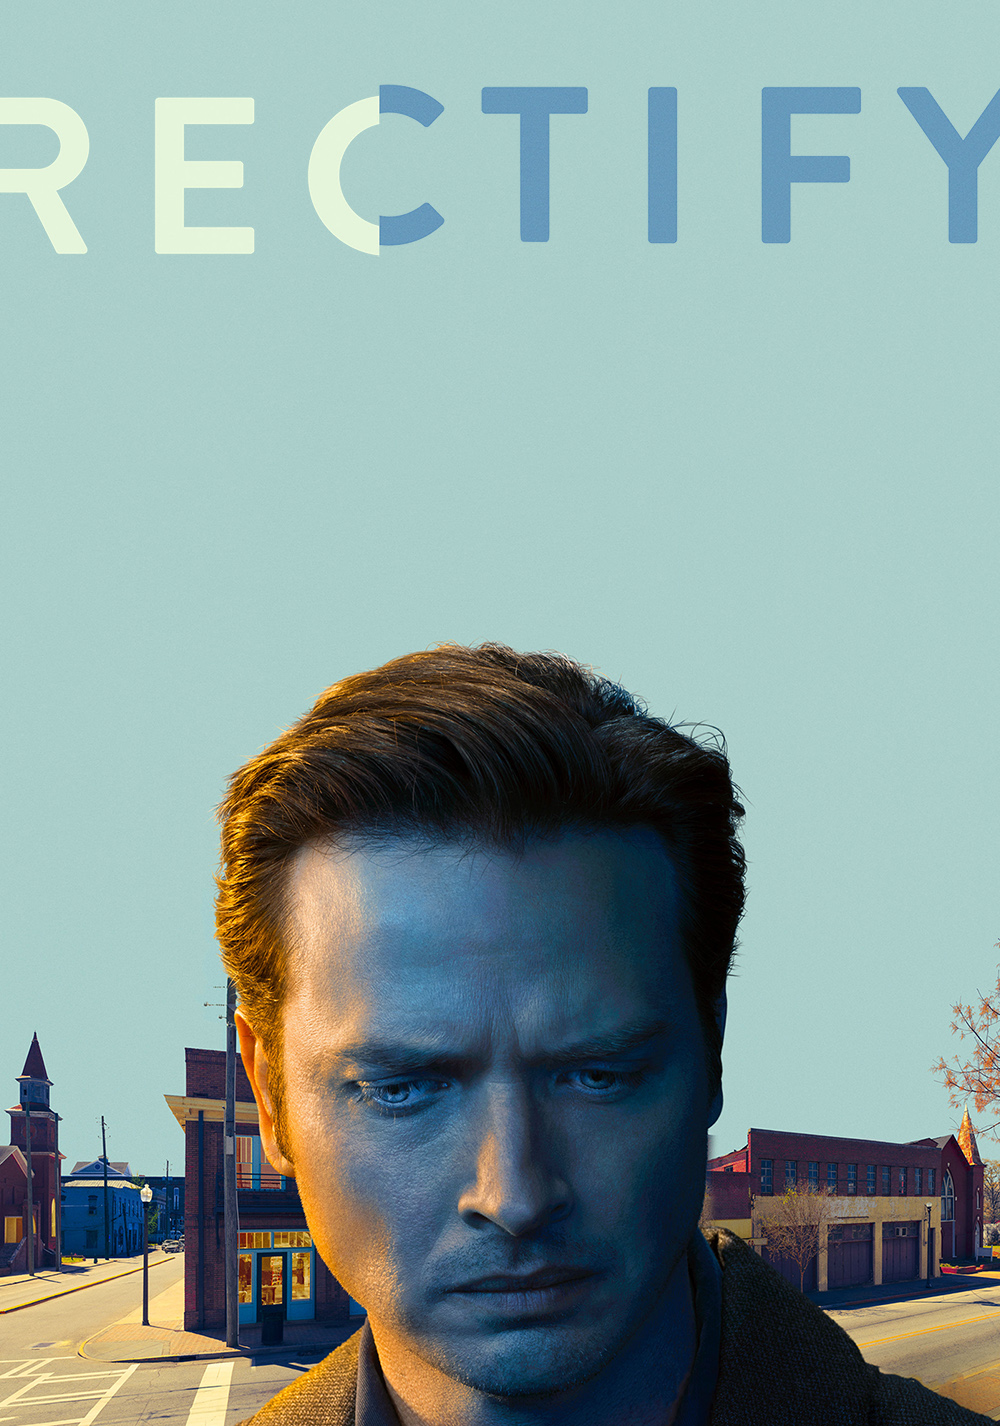 Rectify